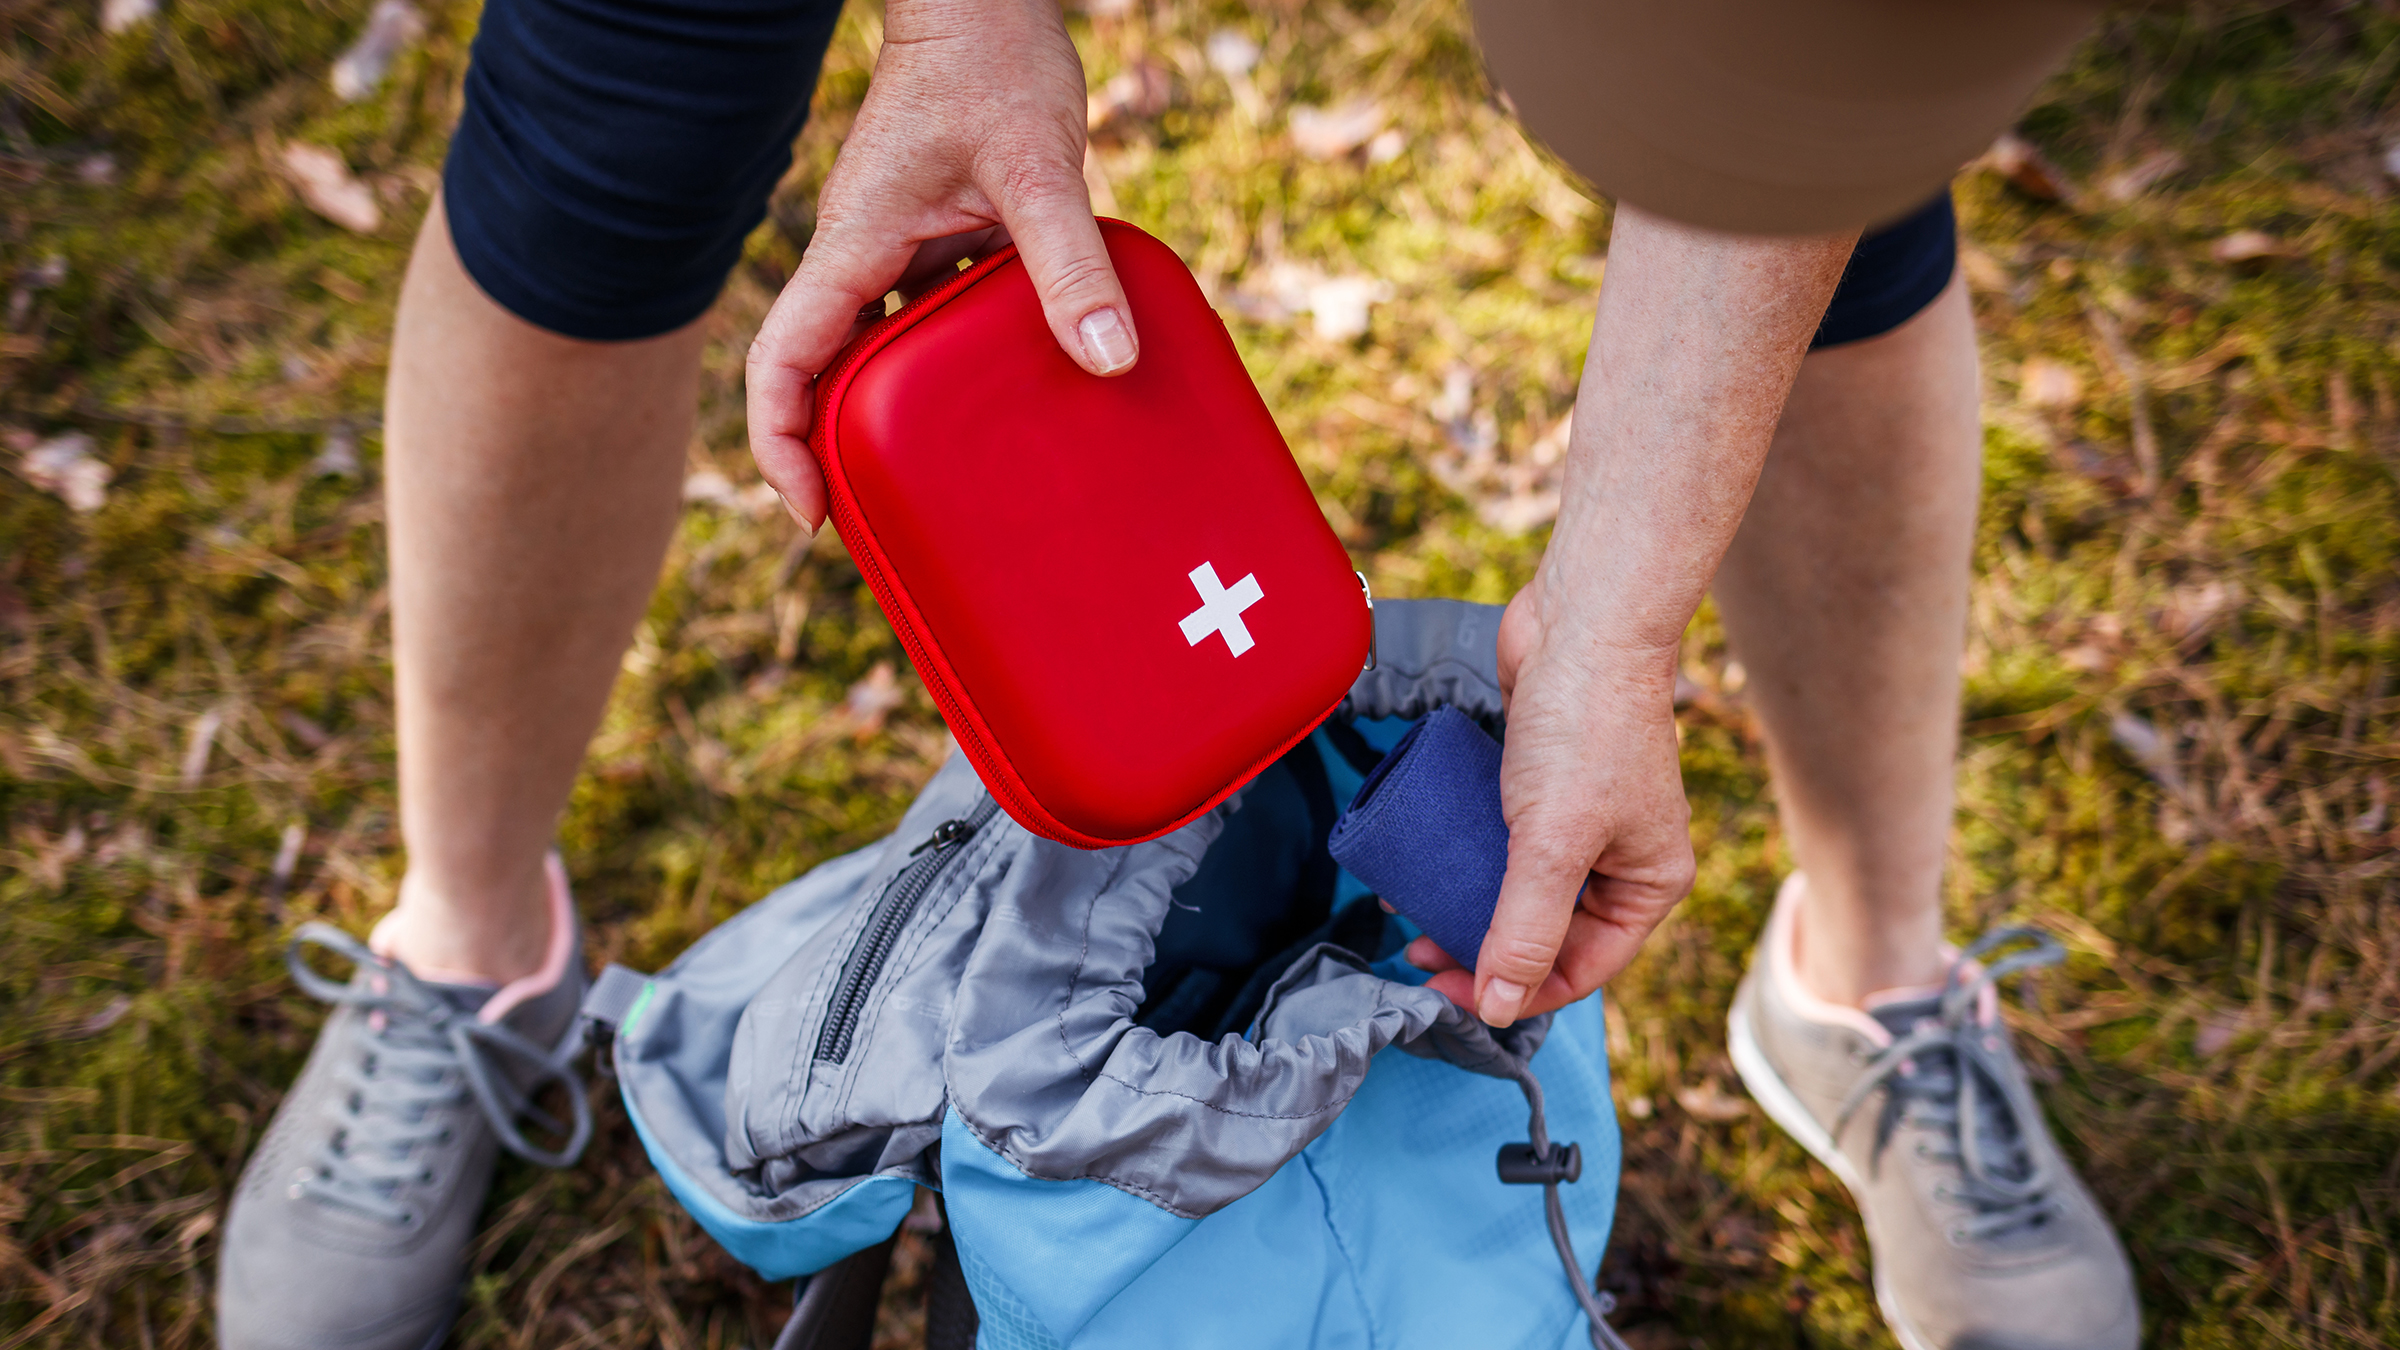 What do I need in my first aid kit? 